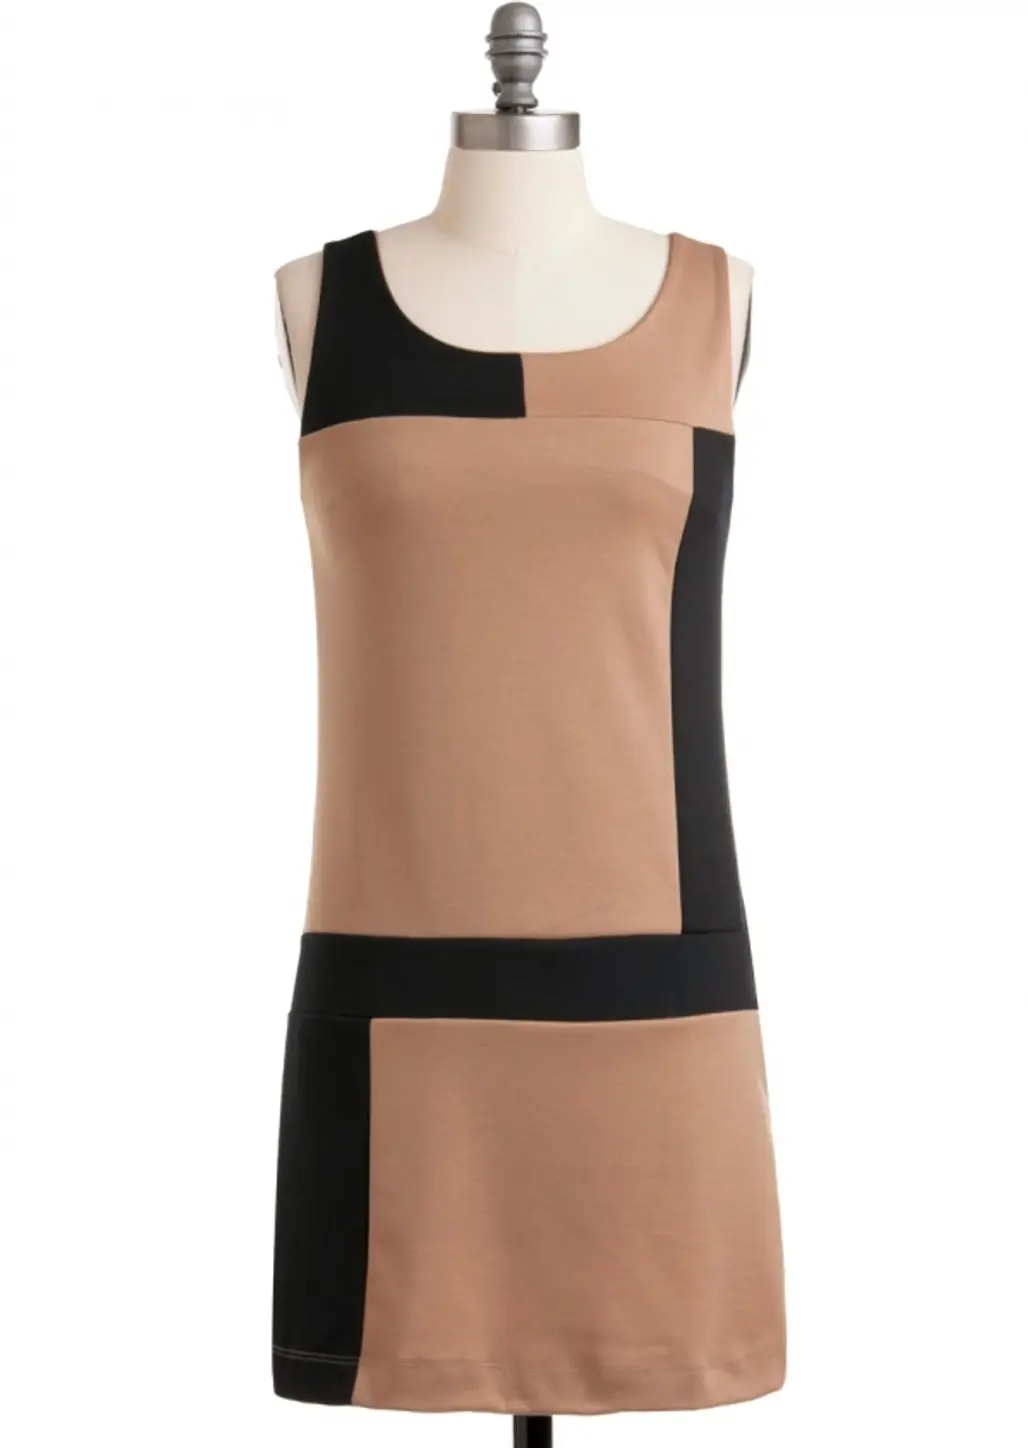 Rock the Color Block Dress by ModCloth